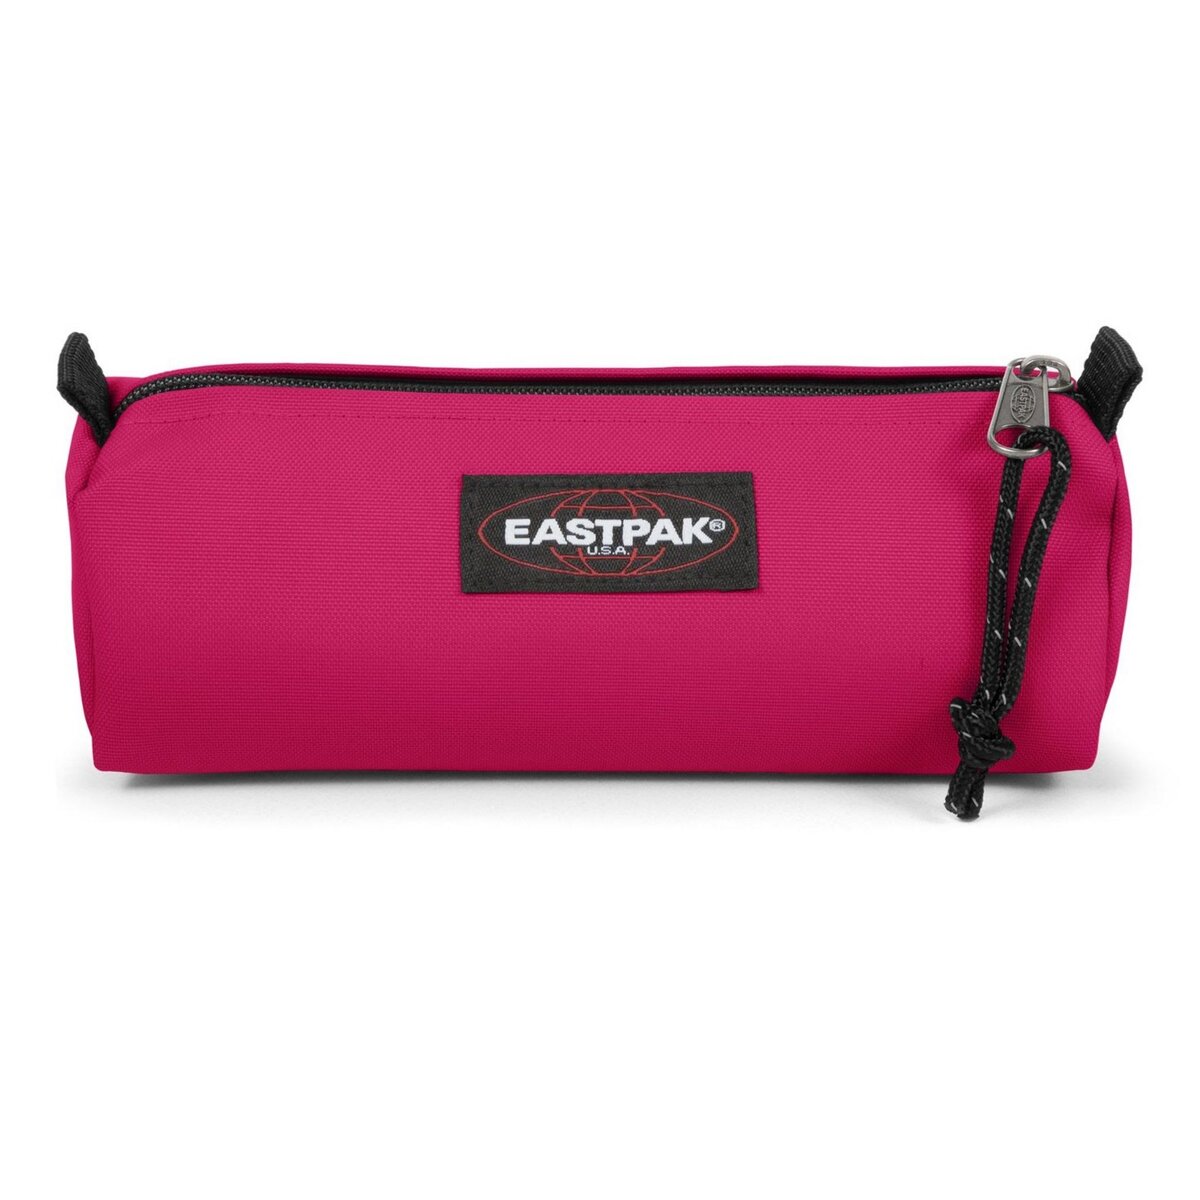 EASTPAK Trousse ronde rose 1 compartiment Benchmark Ruby Pink